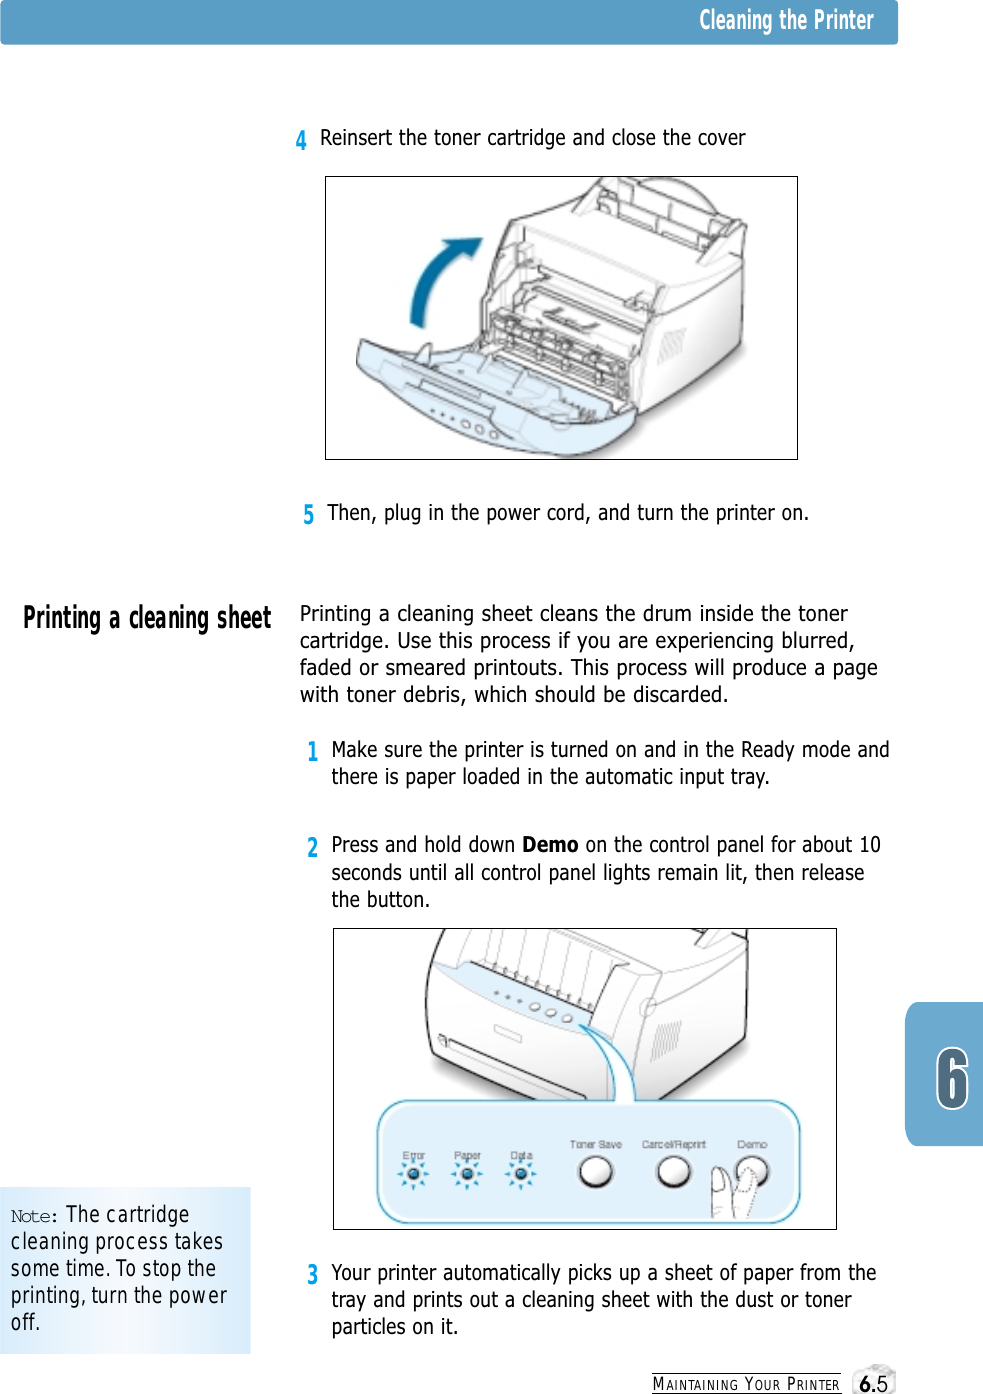 3Your printer automatically picks up a sheet of paper from thetray and prints out a cleaning sheet with the dust or tonerparticles on it.MAINTAINING YOUR PRINTER5Then, plug in the power cord, and turn the printer on.Note: The cartridgecleaning process takessome time. To stop theprinting, turn the poweroff.Cleaning the PrinterPrinting a cleaning sheet Printing a cleaning sheet cleans the drum inside the tonercartridge. Use this process if you are experiencing blurred,faded or smeared printouts. This process will produce a pagewith toner debris, which should be discarded.1Make sure the printer is turned on and in the Ready mode andthere is paper loaded in the automatic input tray.2Press and hold down Demo on the control panel for about 10seconds until all control panel lights remain lit, then releasethe button.4Reinsert the toner cartridge and close the cover6.5